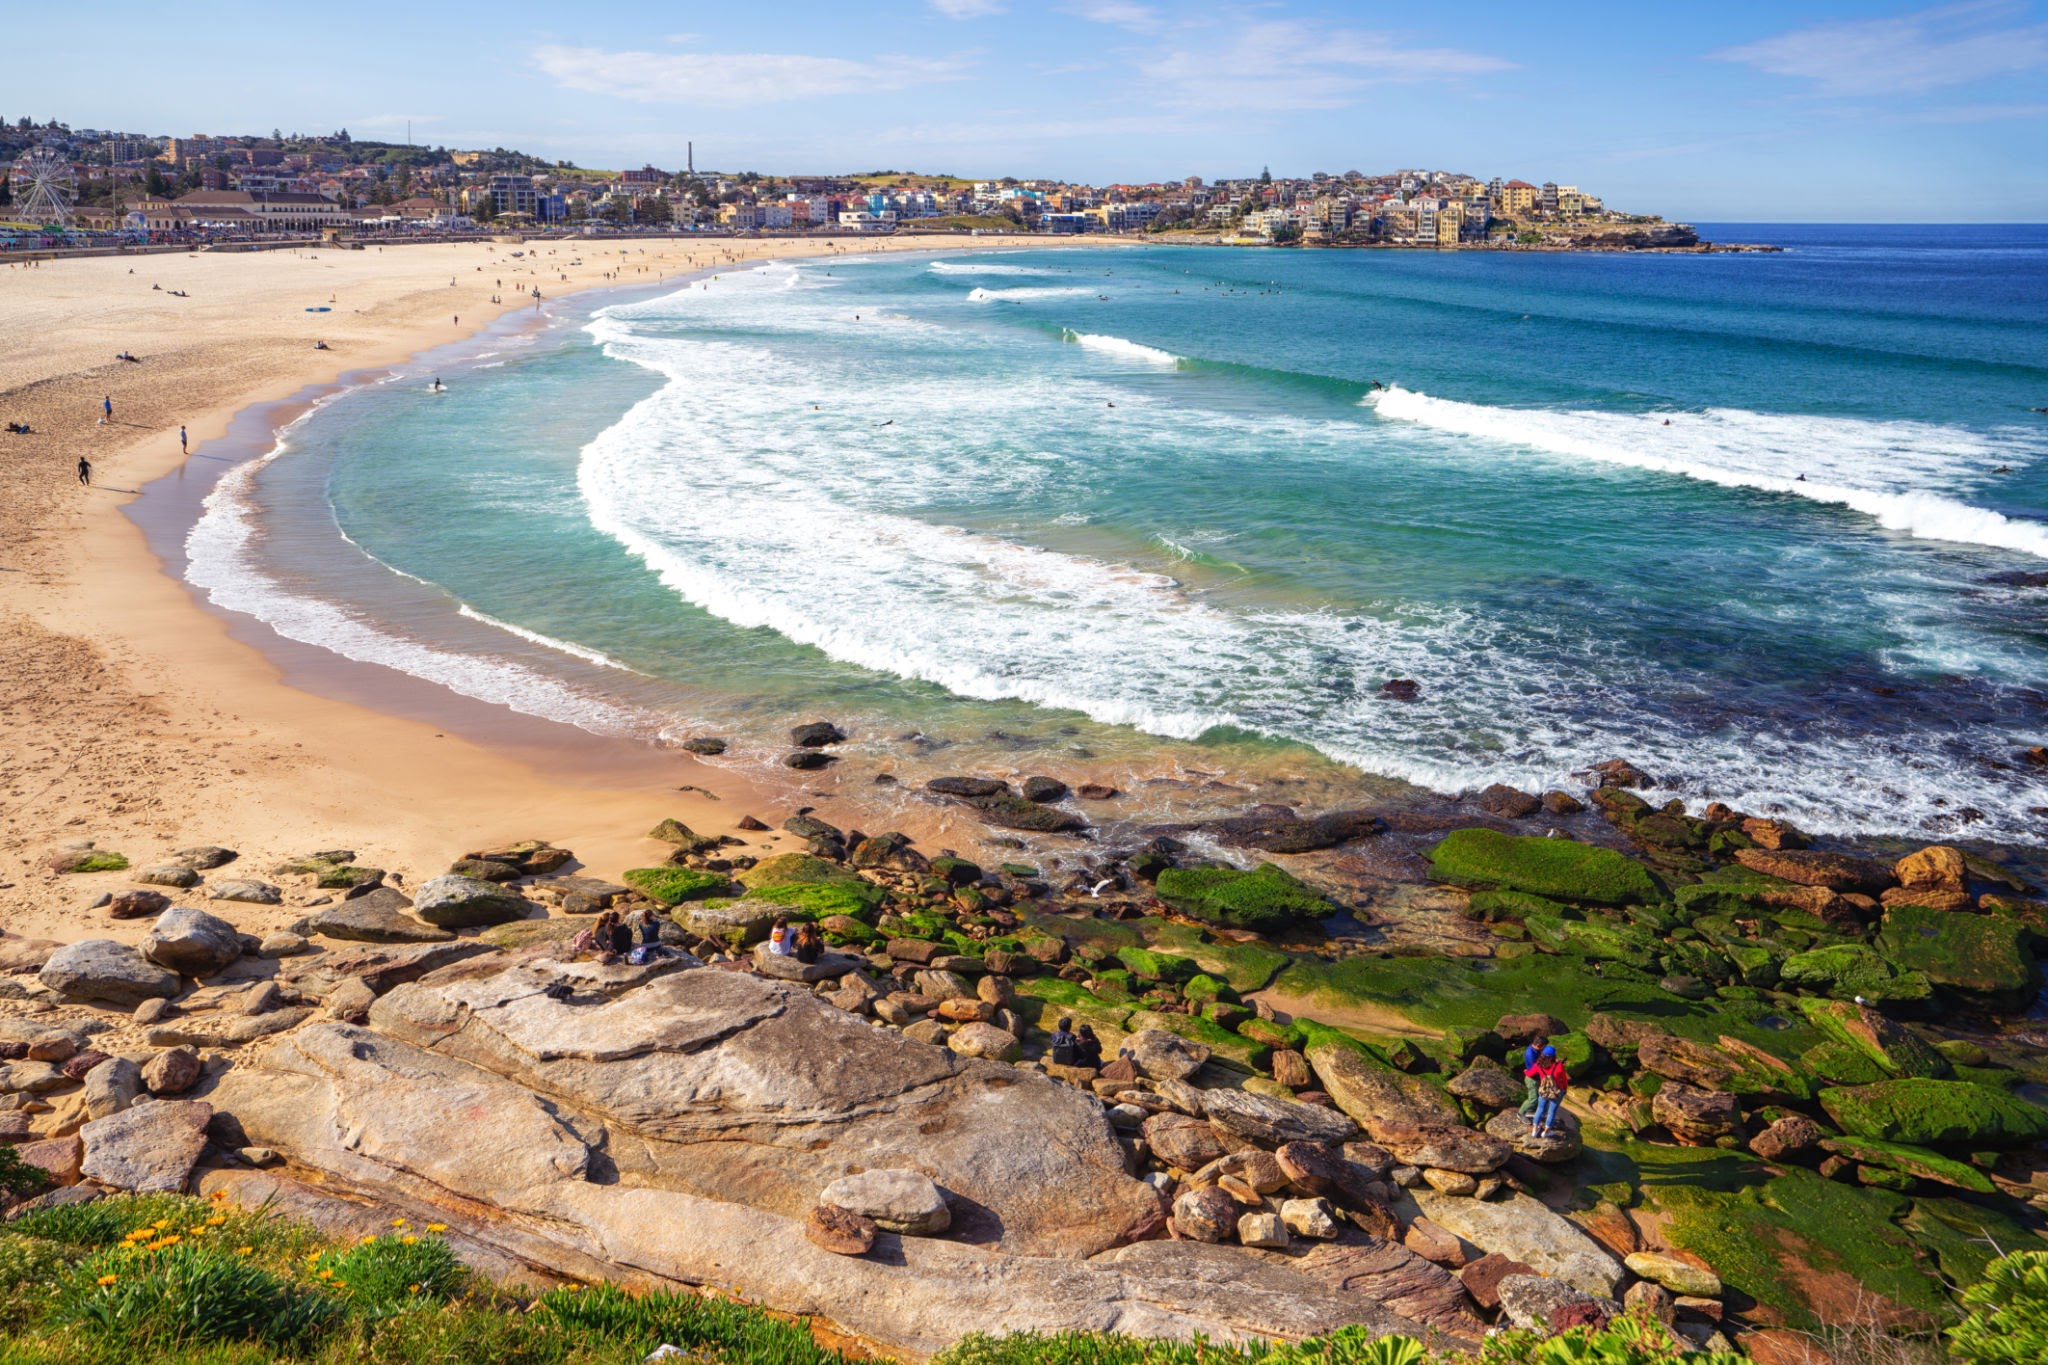 Bondi Beach Removalists Are Here to Help!